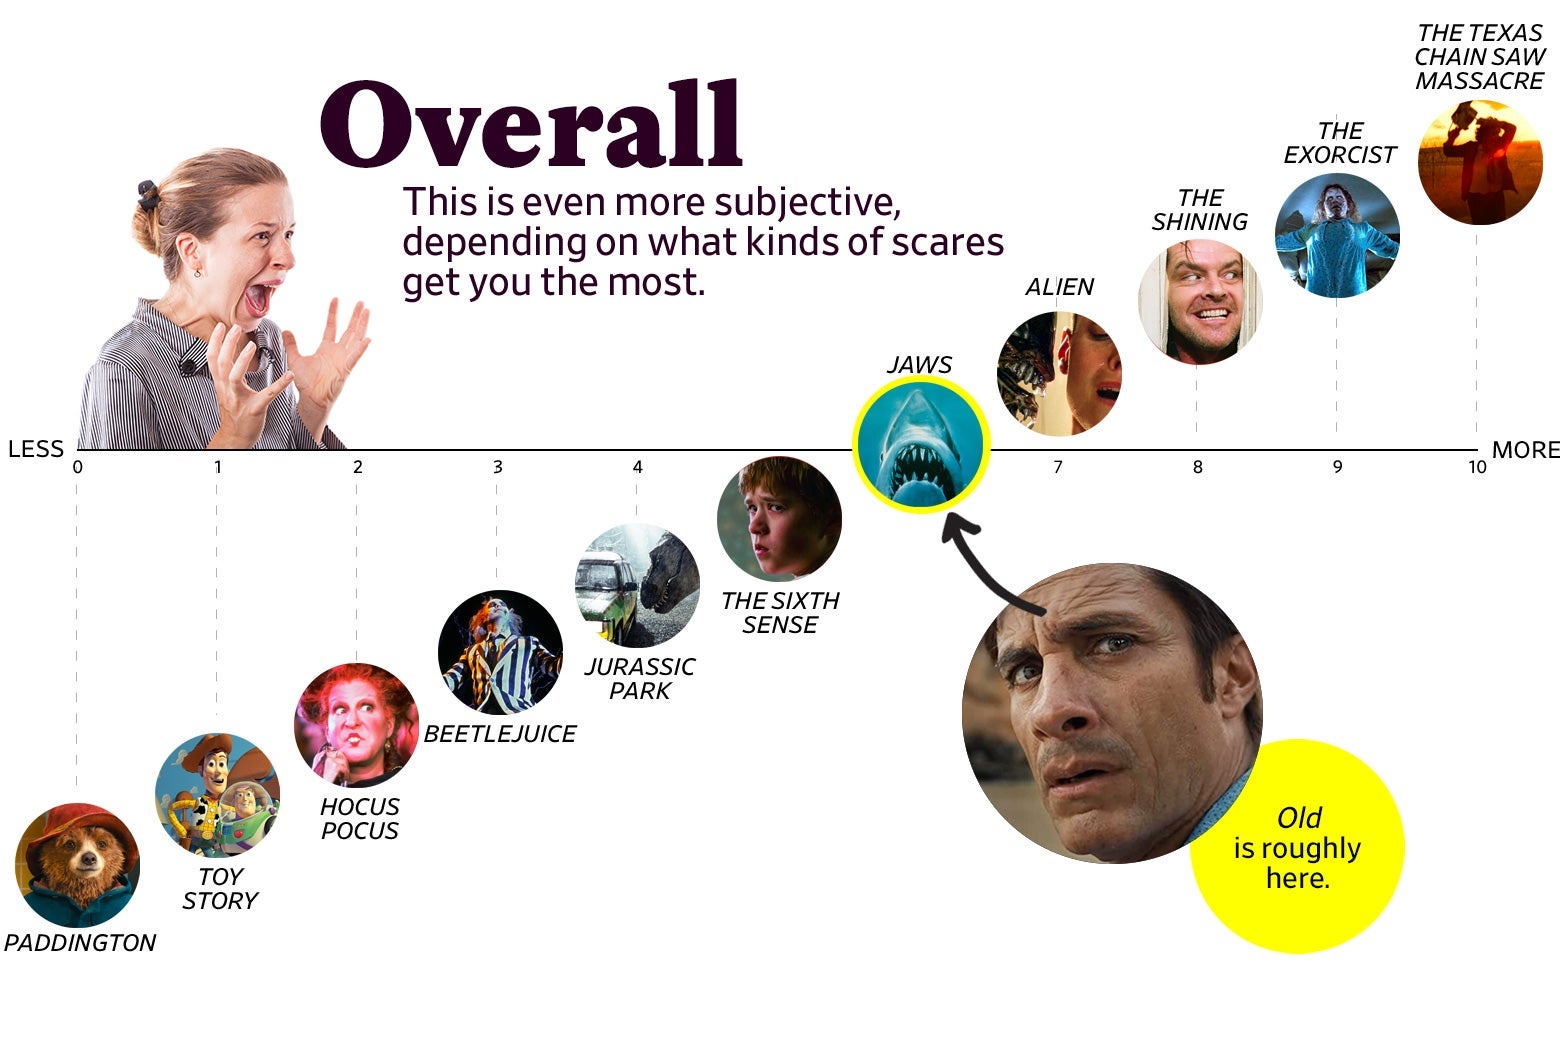 A chart titled “Overall: This is even more subjective, depending on what kinds of scares get you the most” shows that Old ranks as a 6 overall, roughly the same as Jaws, and one point higher than The Sixth Sense. The scale ranges from Paddington (0) to the original Texas Chain Saw Massacre (10). 